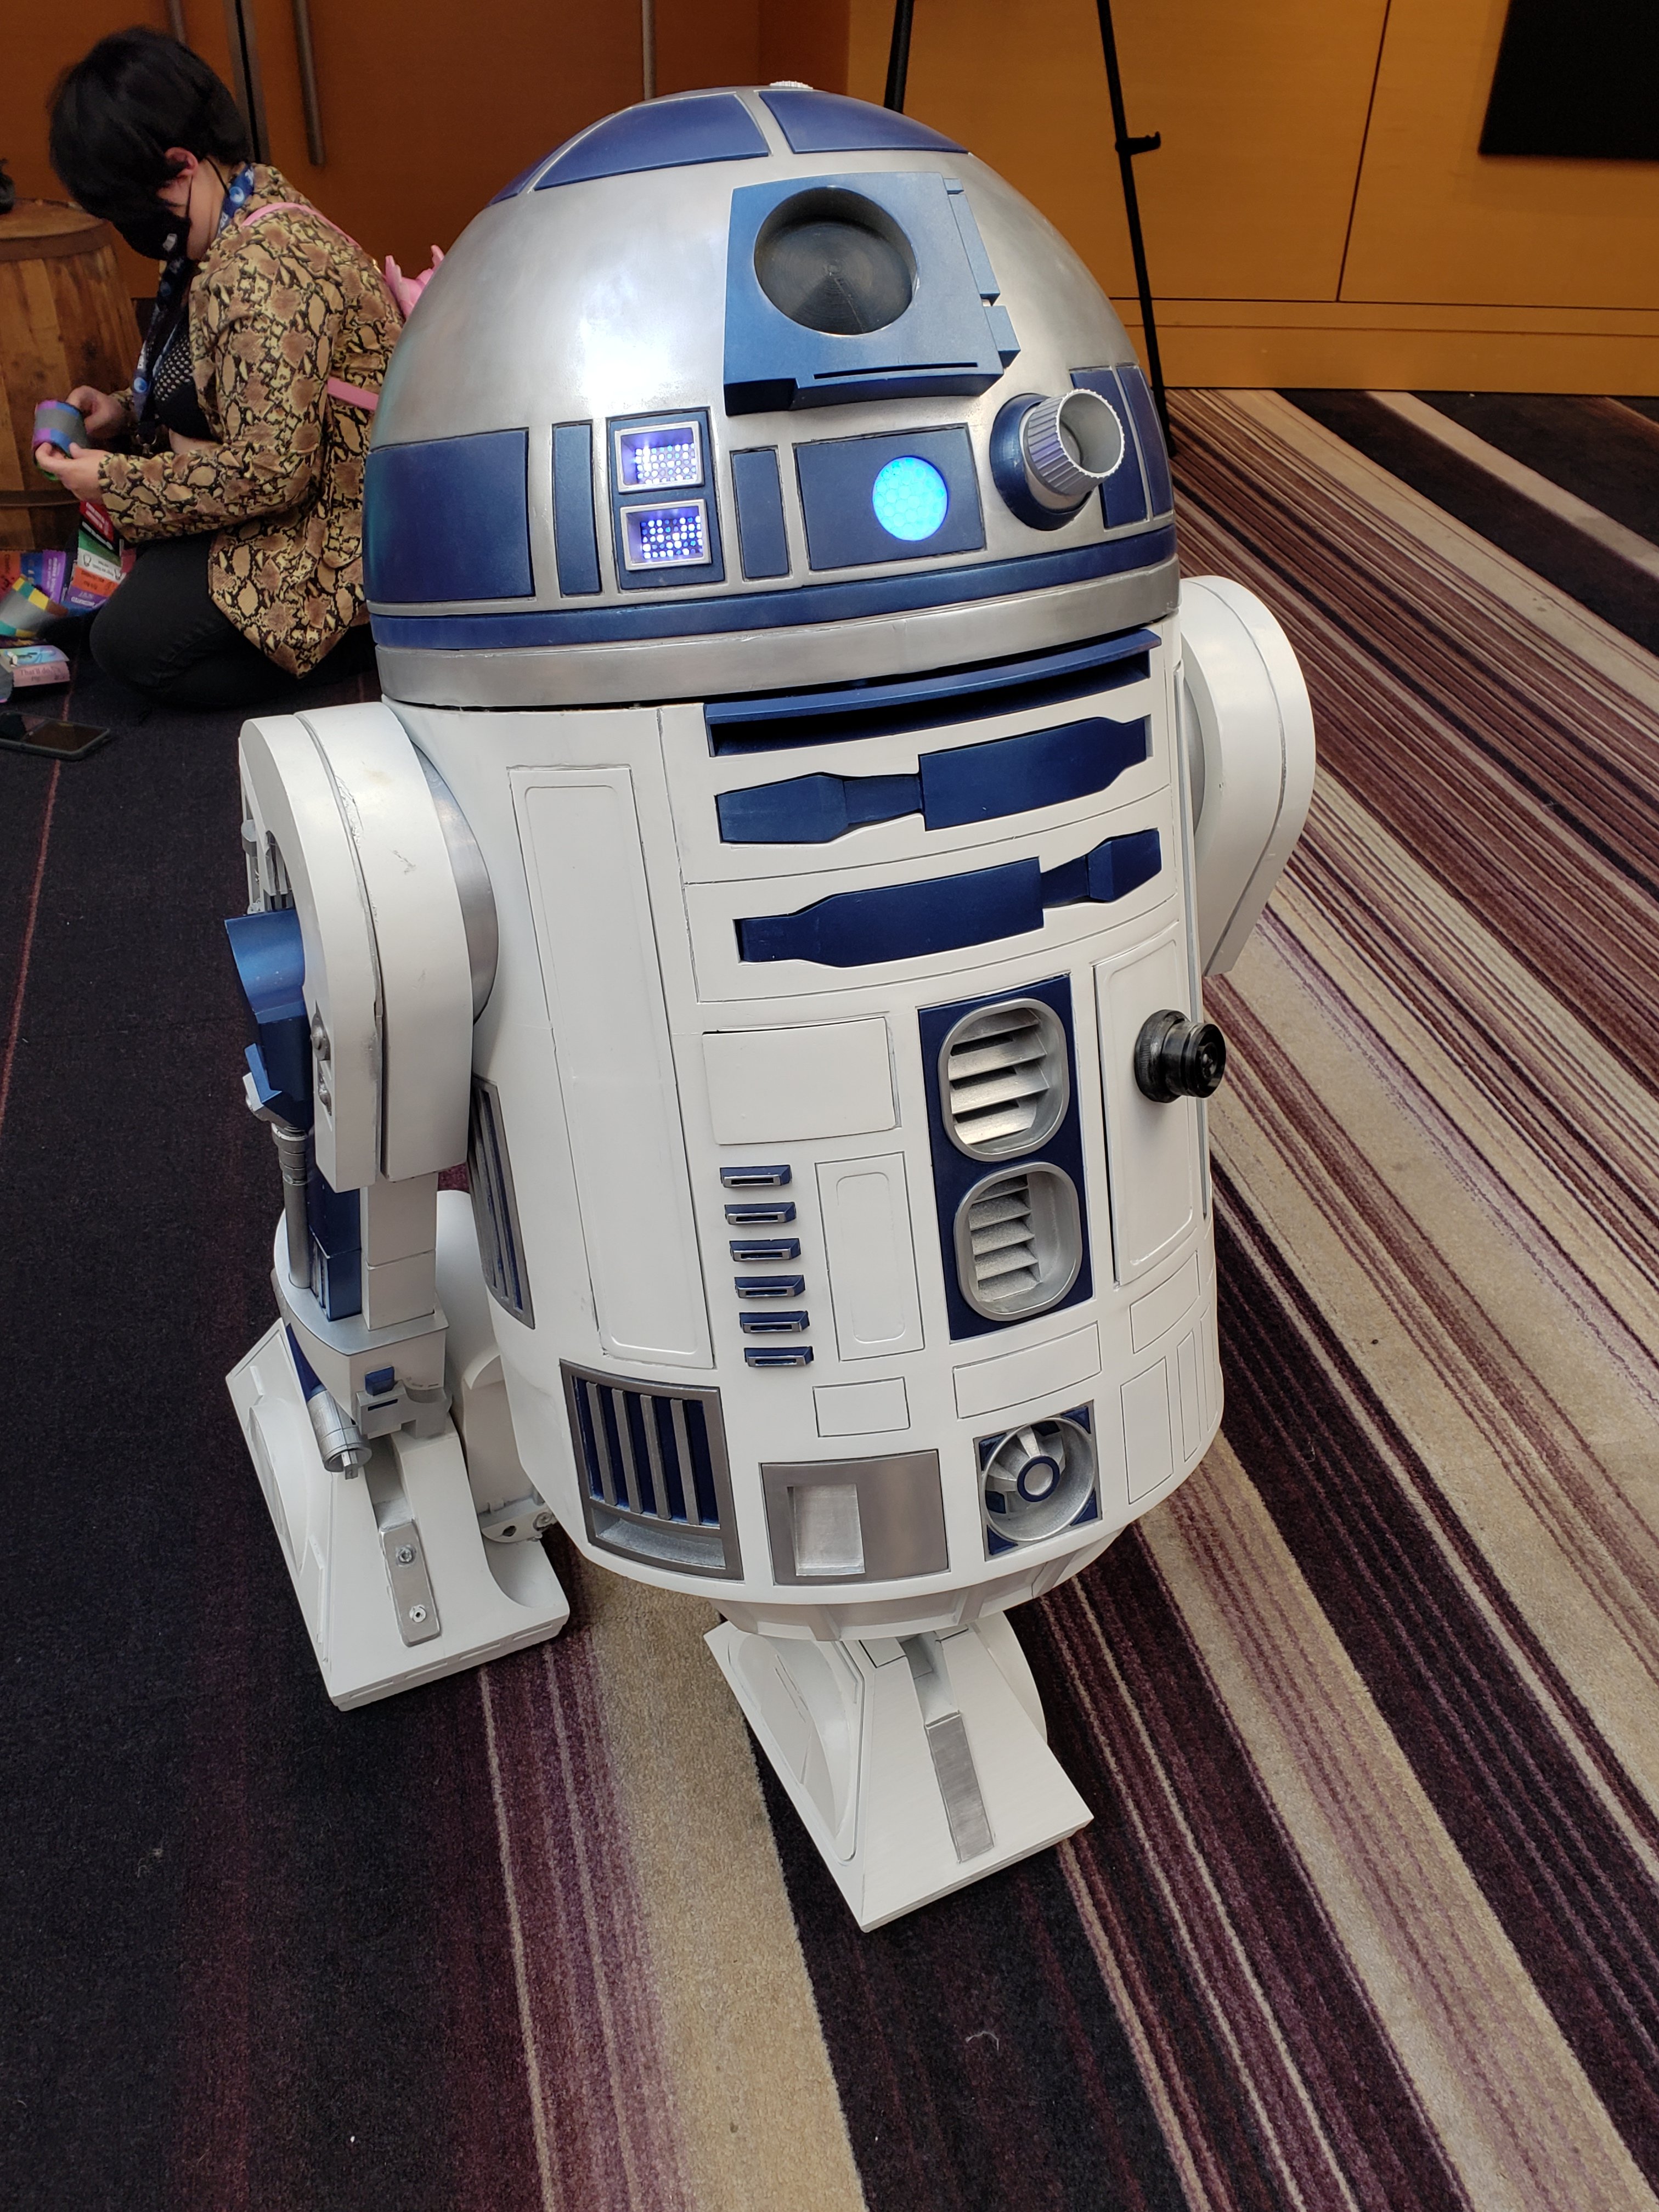 Another R2-D2